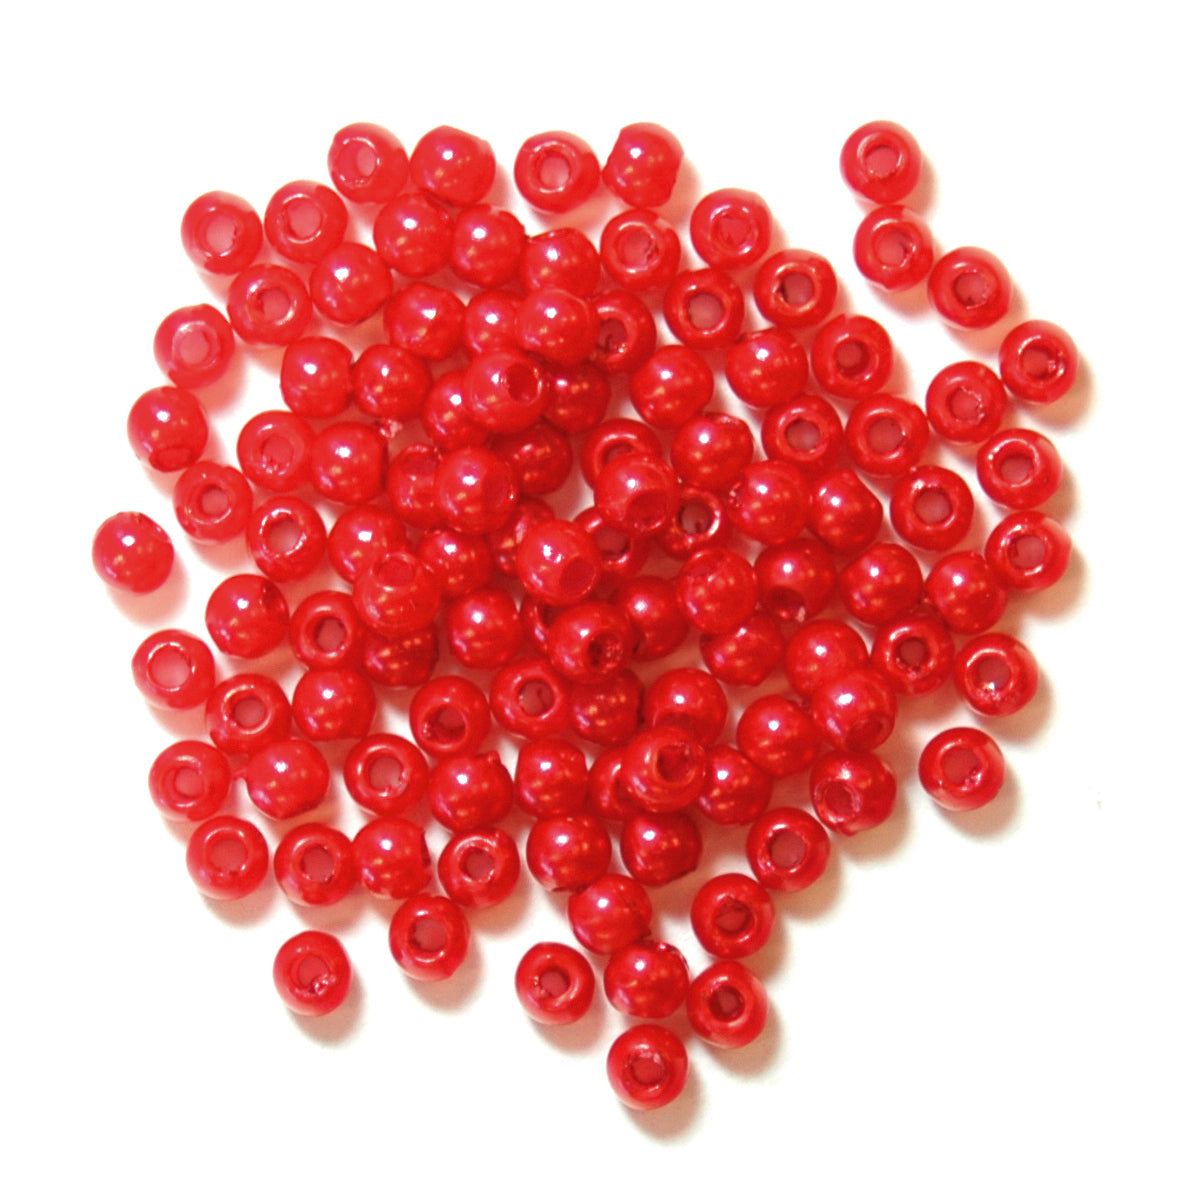 Trimits Pearl Beads - Red: 7g